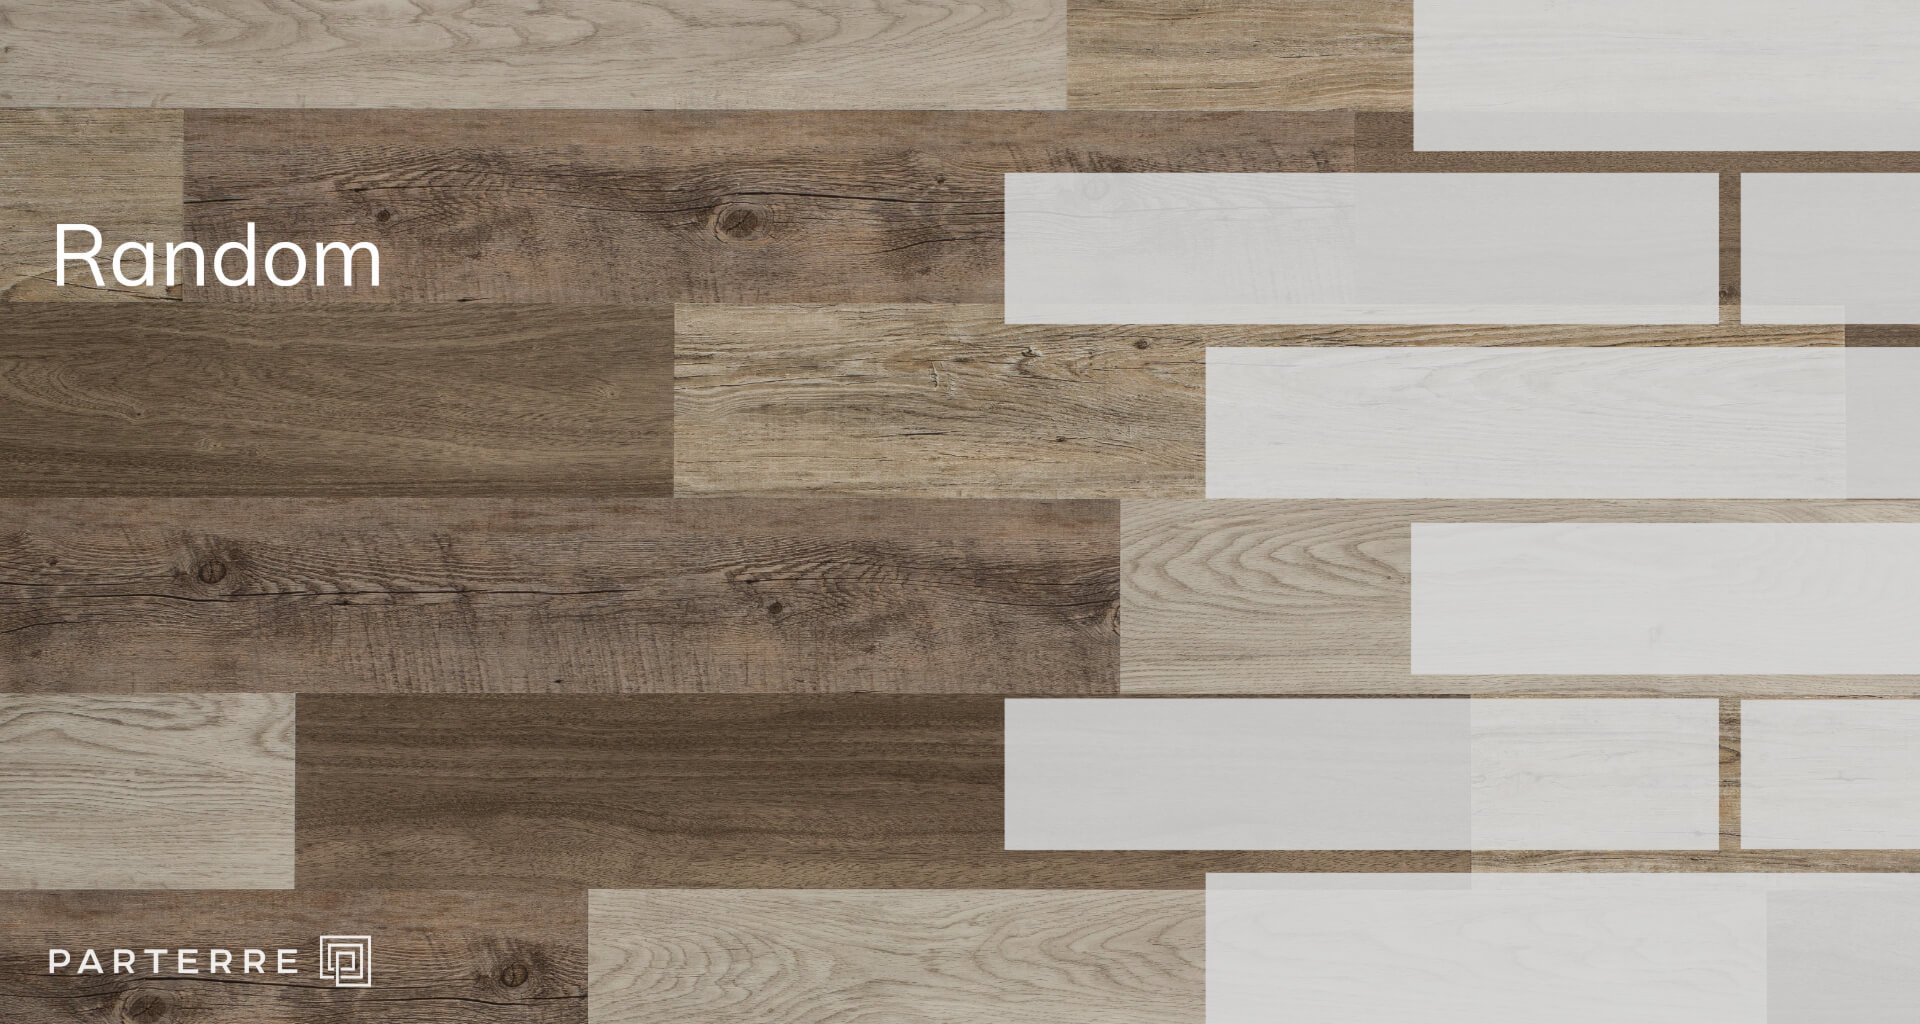 9 Vinyl Flooring Patterns For Your Next, Laminate Flooring Patterns And Colors